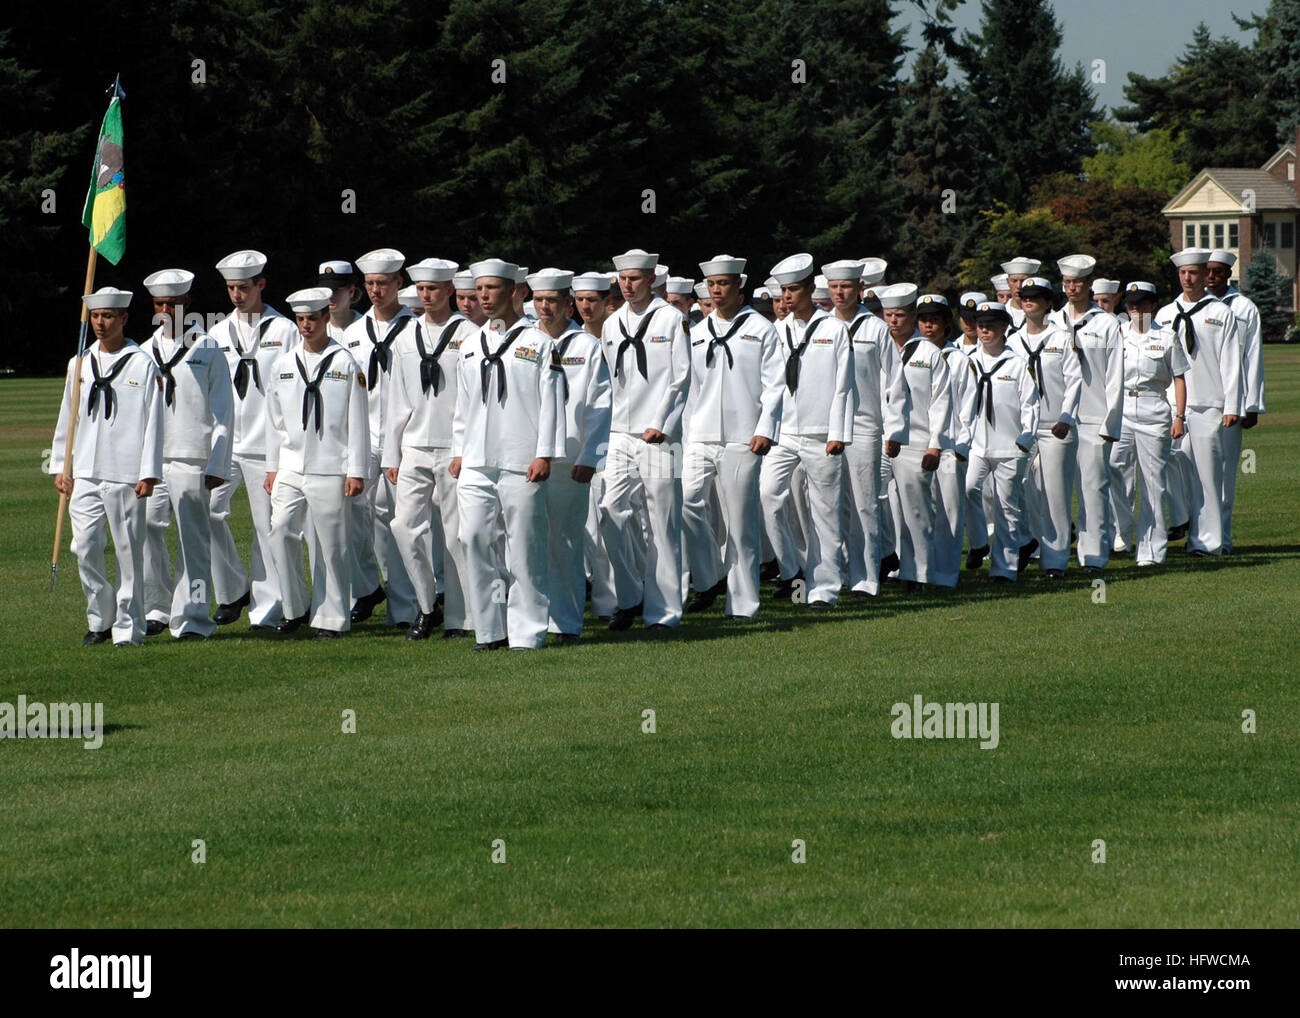 080823-N-2296G-074 FORT LEWIS, Wash. (Aug. 23, 2008) Sea Cadets from the Naval Sea Cadet Corps Field Medical Training Unit march on the field with other units from Recruit Training Command Northwest during graduation ceremonies on the Fort Lewis parade grounds. (U.S. Navy photo by Mass Communication Specialist 1st Class Dave Gordon/Released) US Navy 080823-N-2296G-074 Sea Cadets from the Naval Sea Cadet Corps Field Medical Training Unit march on the field with other units from Recruit Training Command Northwest during graduation ceremonies on the Fort Lewis parade Stock Photo